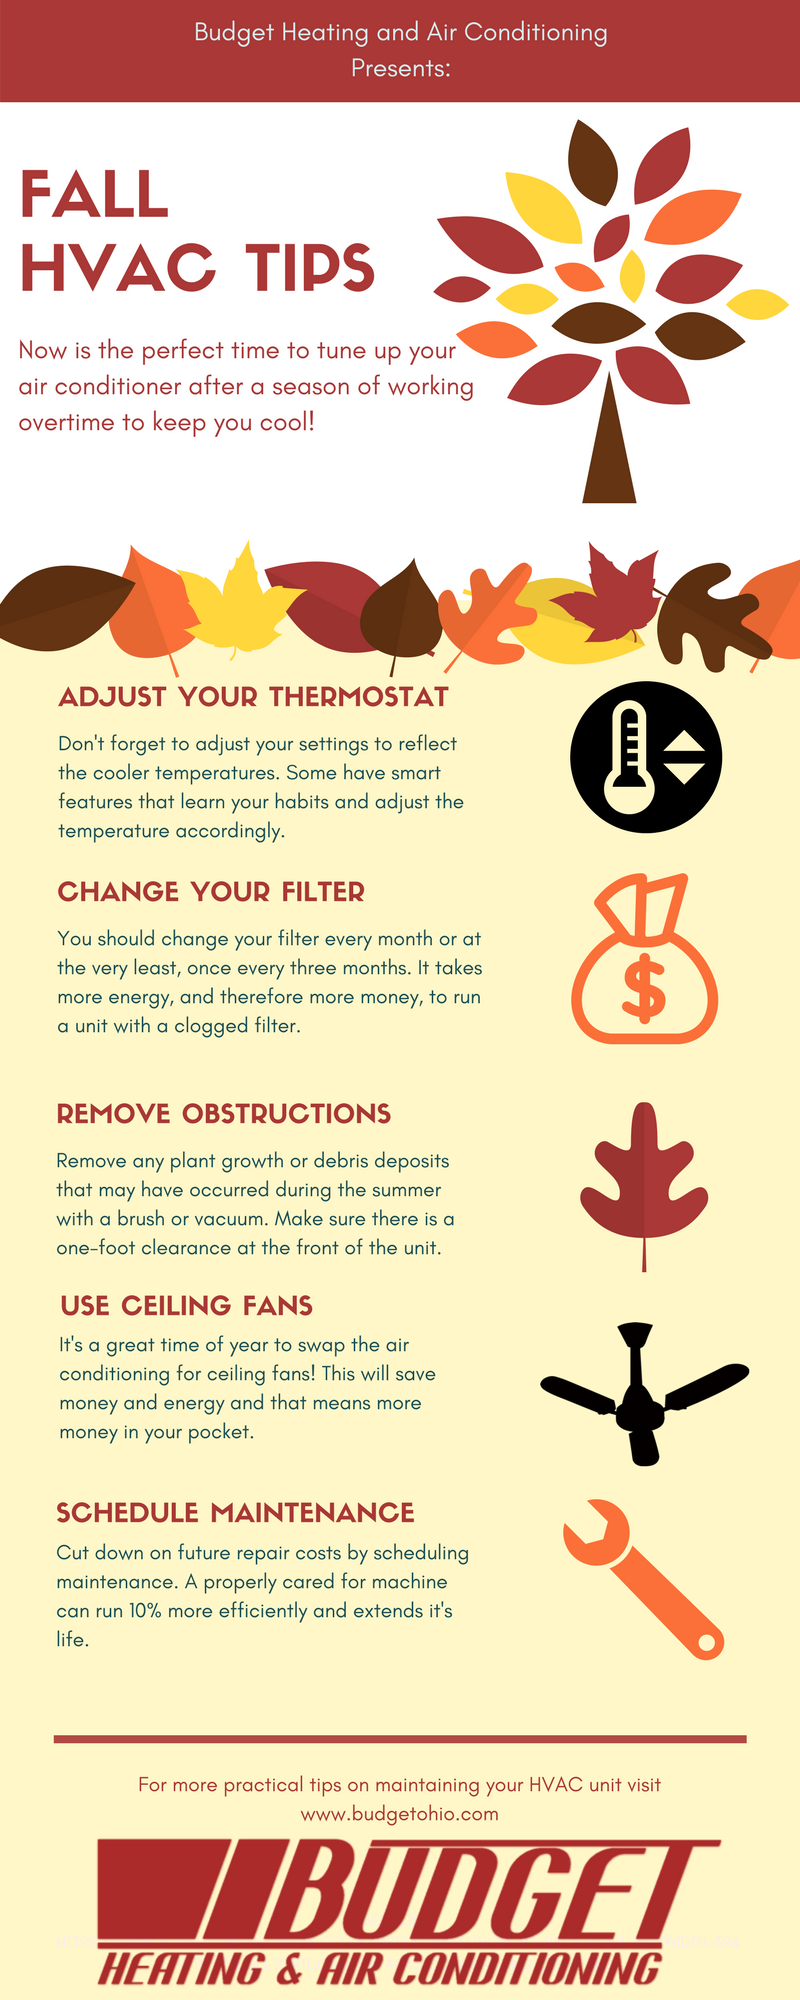 Air conditoner & HVAC maintenance tips for fall season by Budget Heating & Air Conditioning in Cleveland, Ohio.